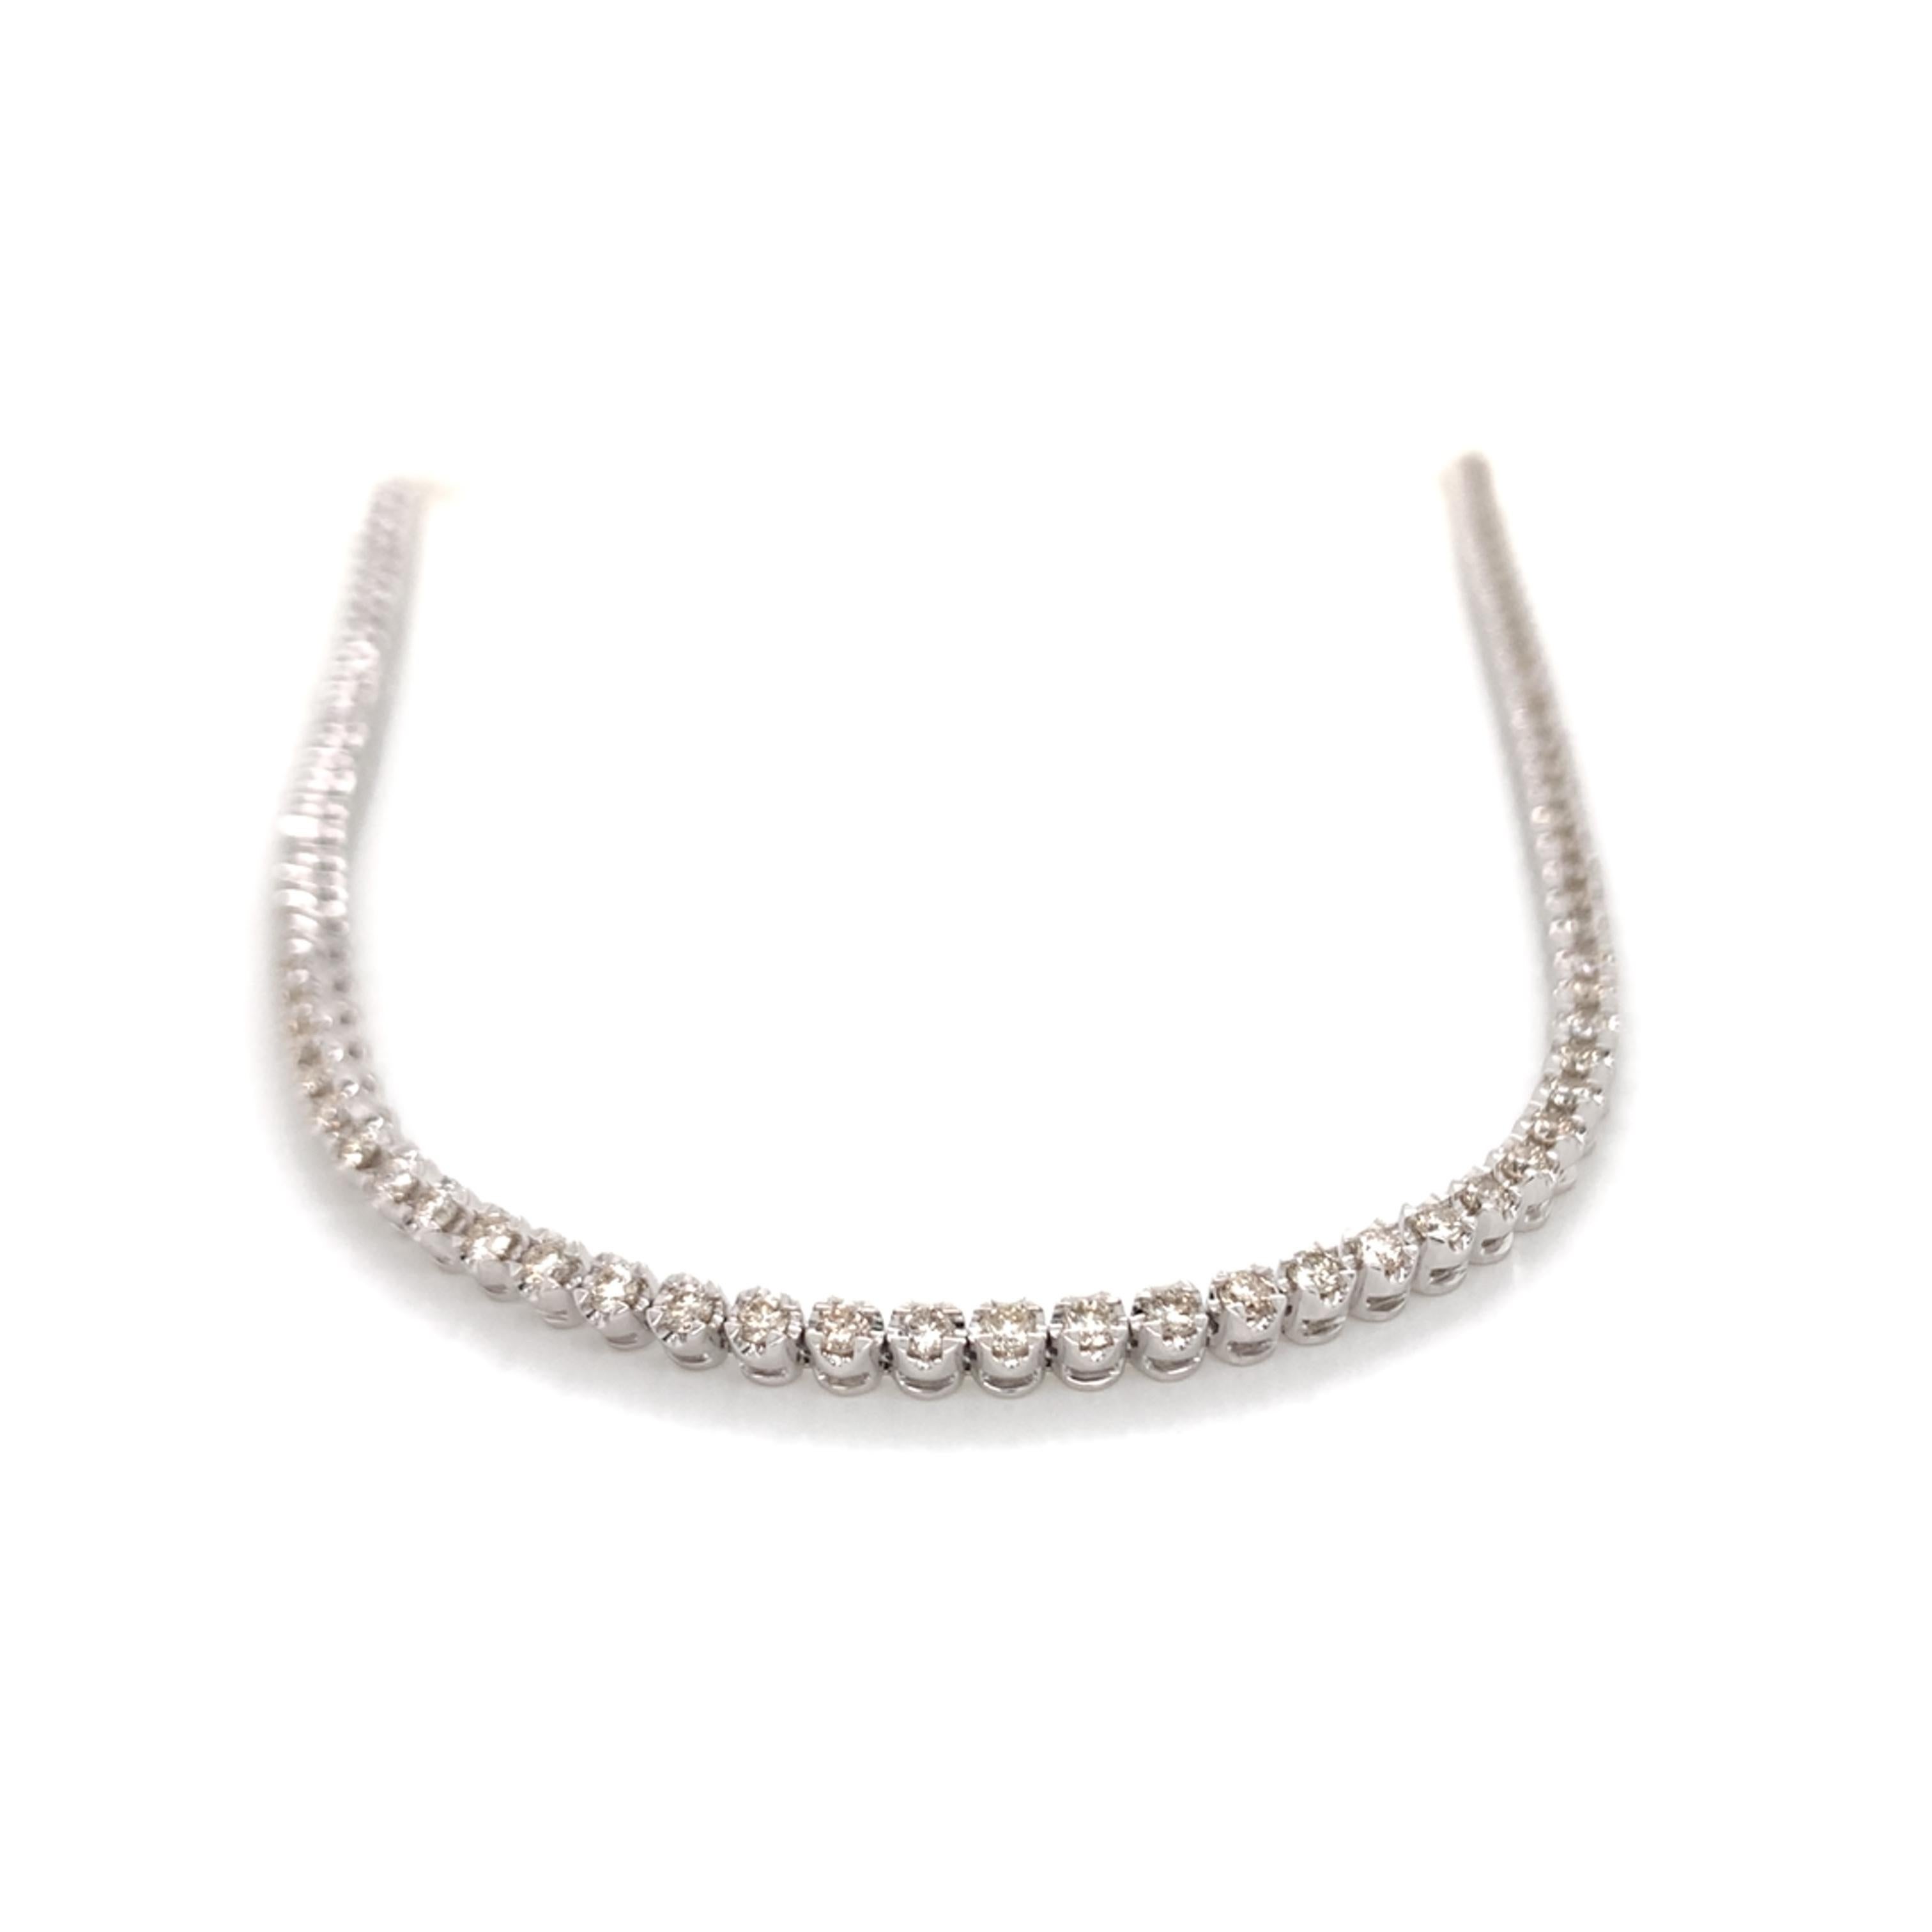 Tennis necklace convertible to tennis bracelet made with real/natural brilliant cut diamonds. Total Diamond Weight: 2.53 carats. Diamond Quantity: 98 round diamonds. Color: J-K. Clarity: VS2-SI1. Mounted on 18kt white gold.